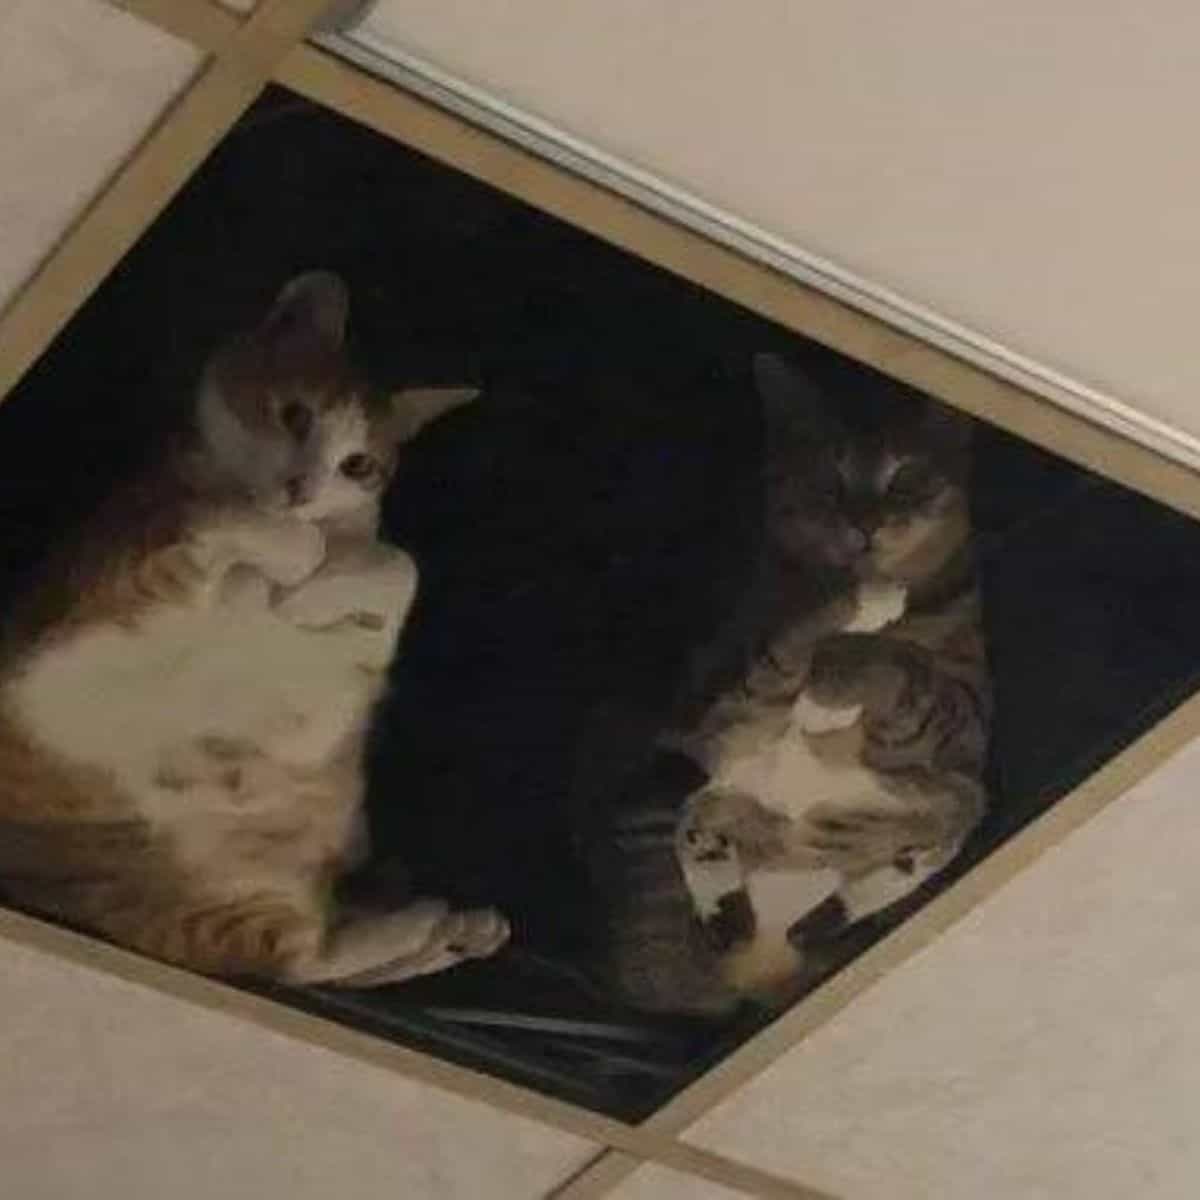 Two cat spying